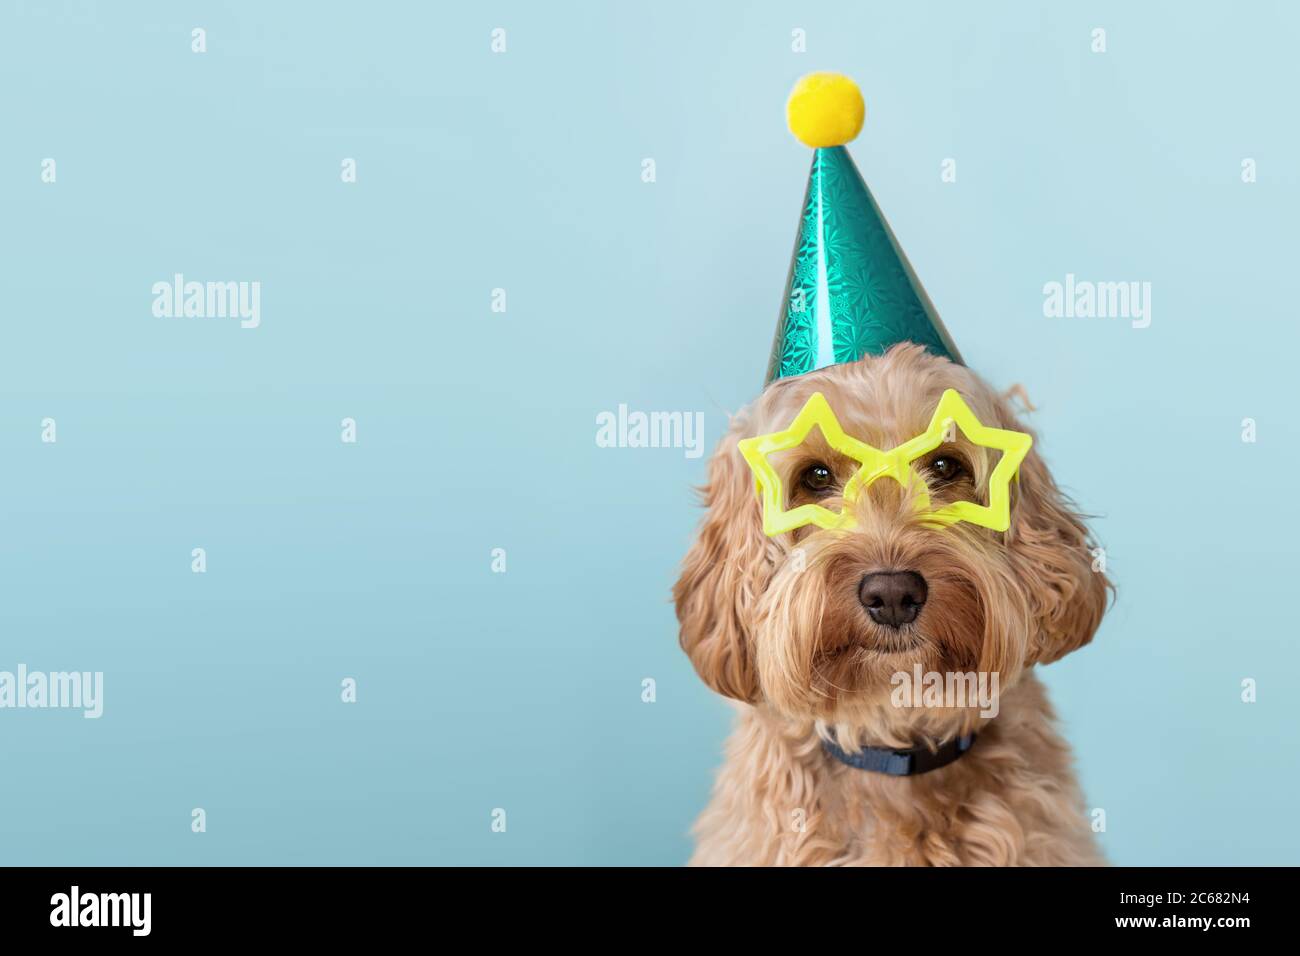 Cute dog at a birthday party wearing party hat and star glasses Stock Photo